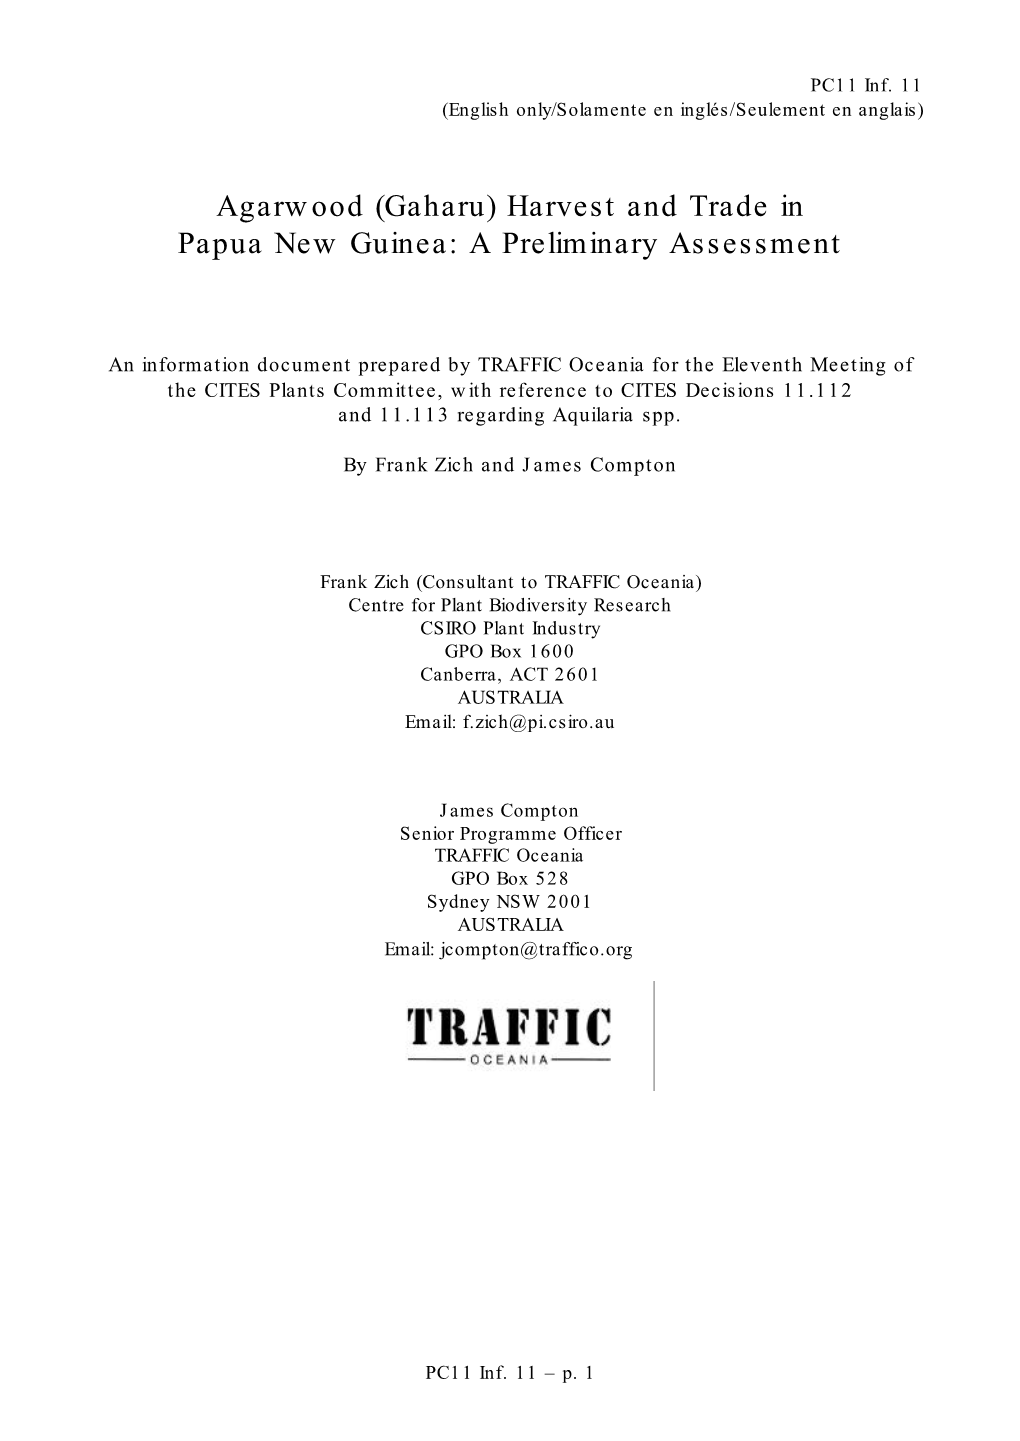 Agarwood (Gaharu) Harvest and Trade in Papua New Guinea: a Preliminary Assessment